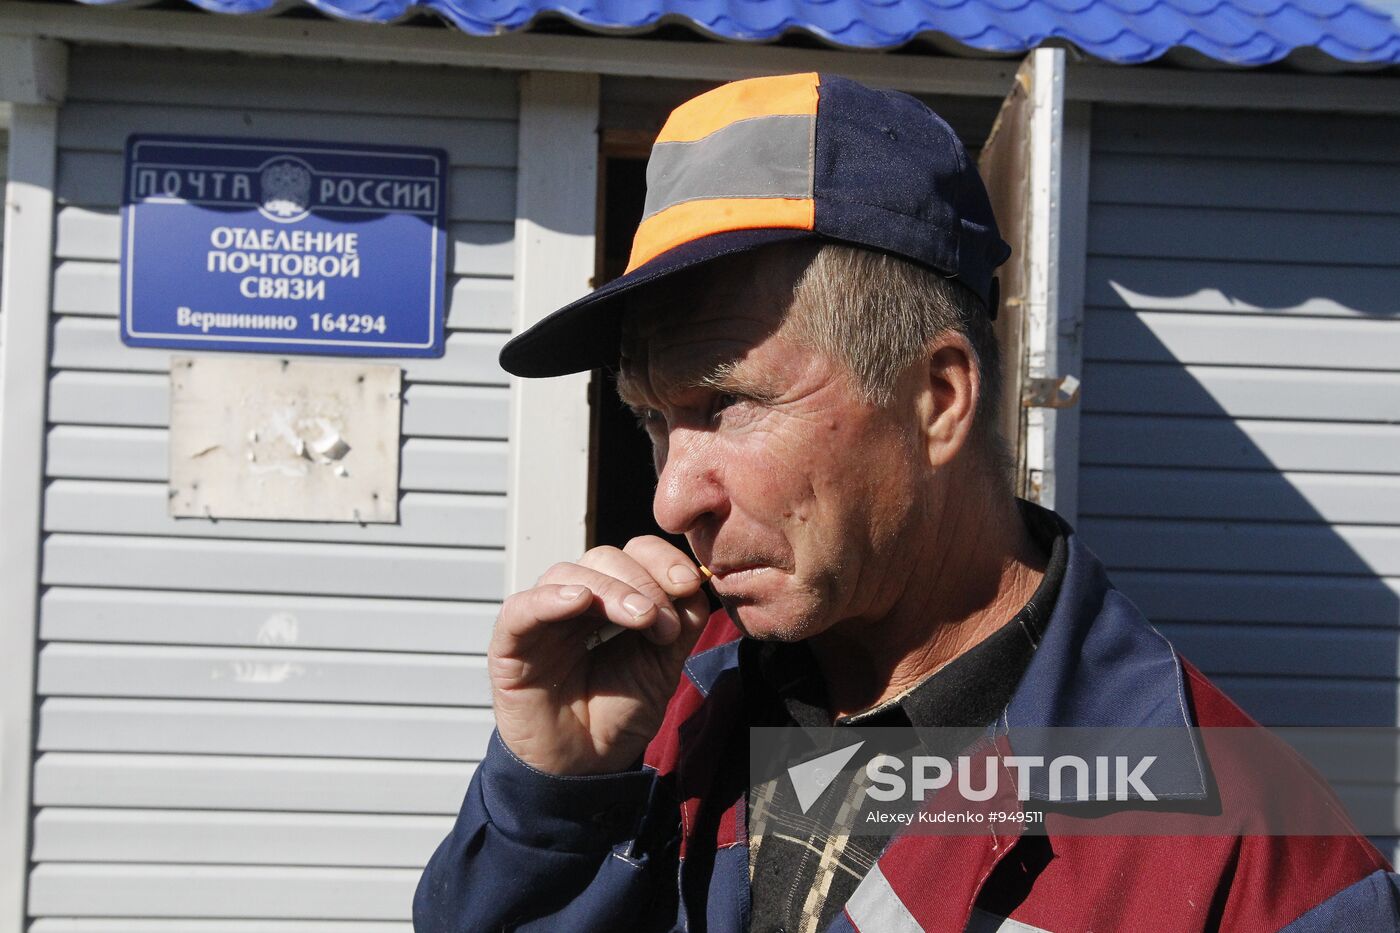 "Mail of Russia" postman makes his rounds in the village